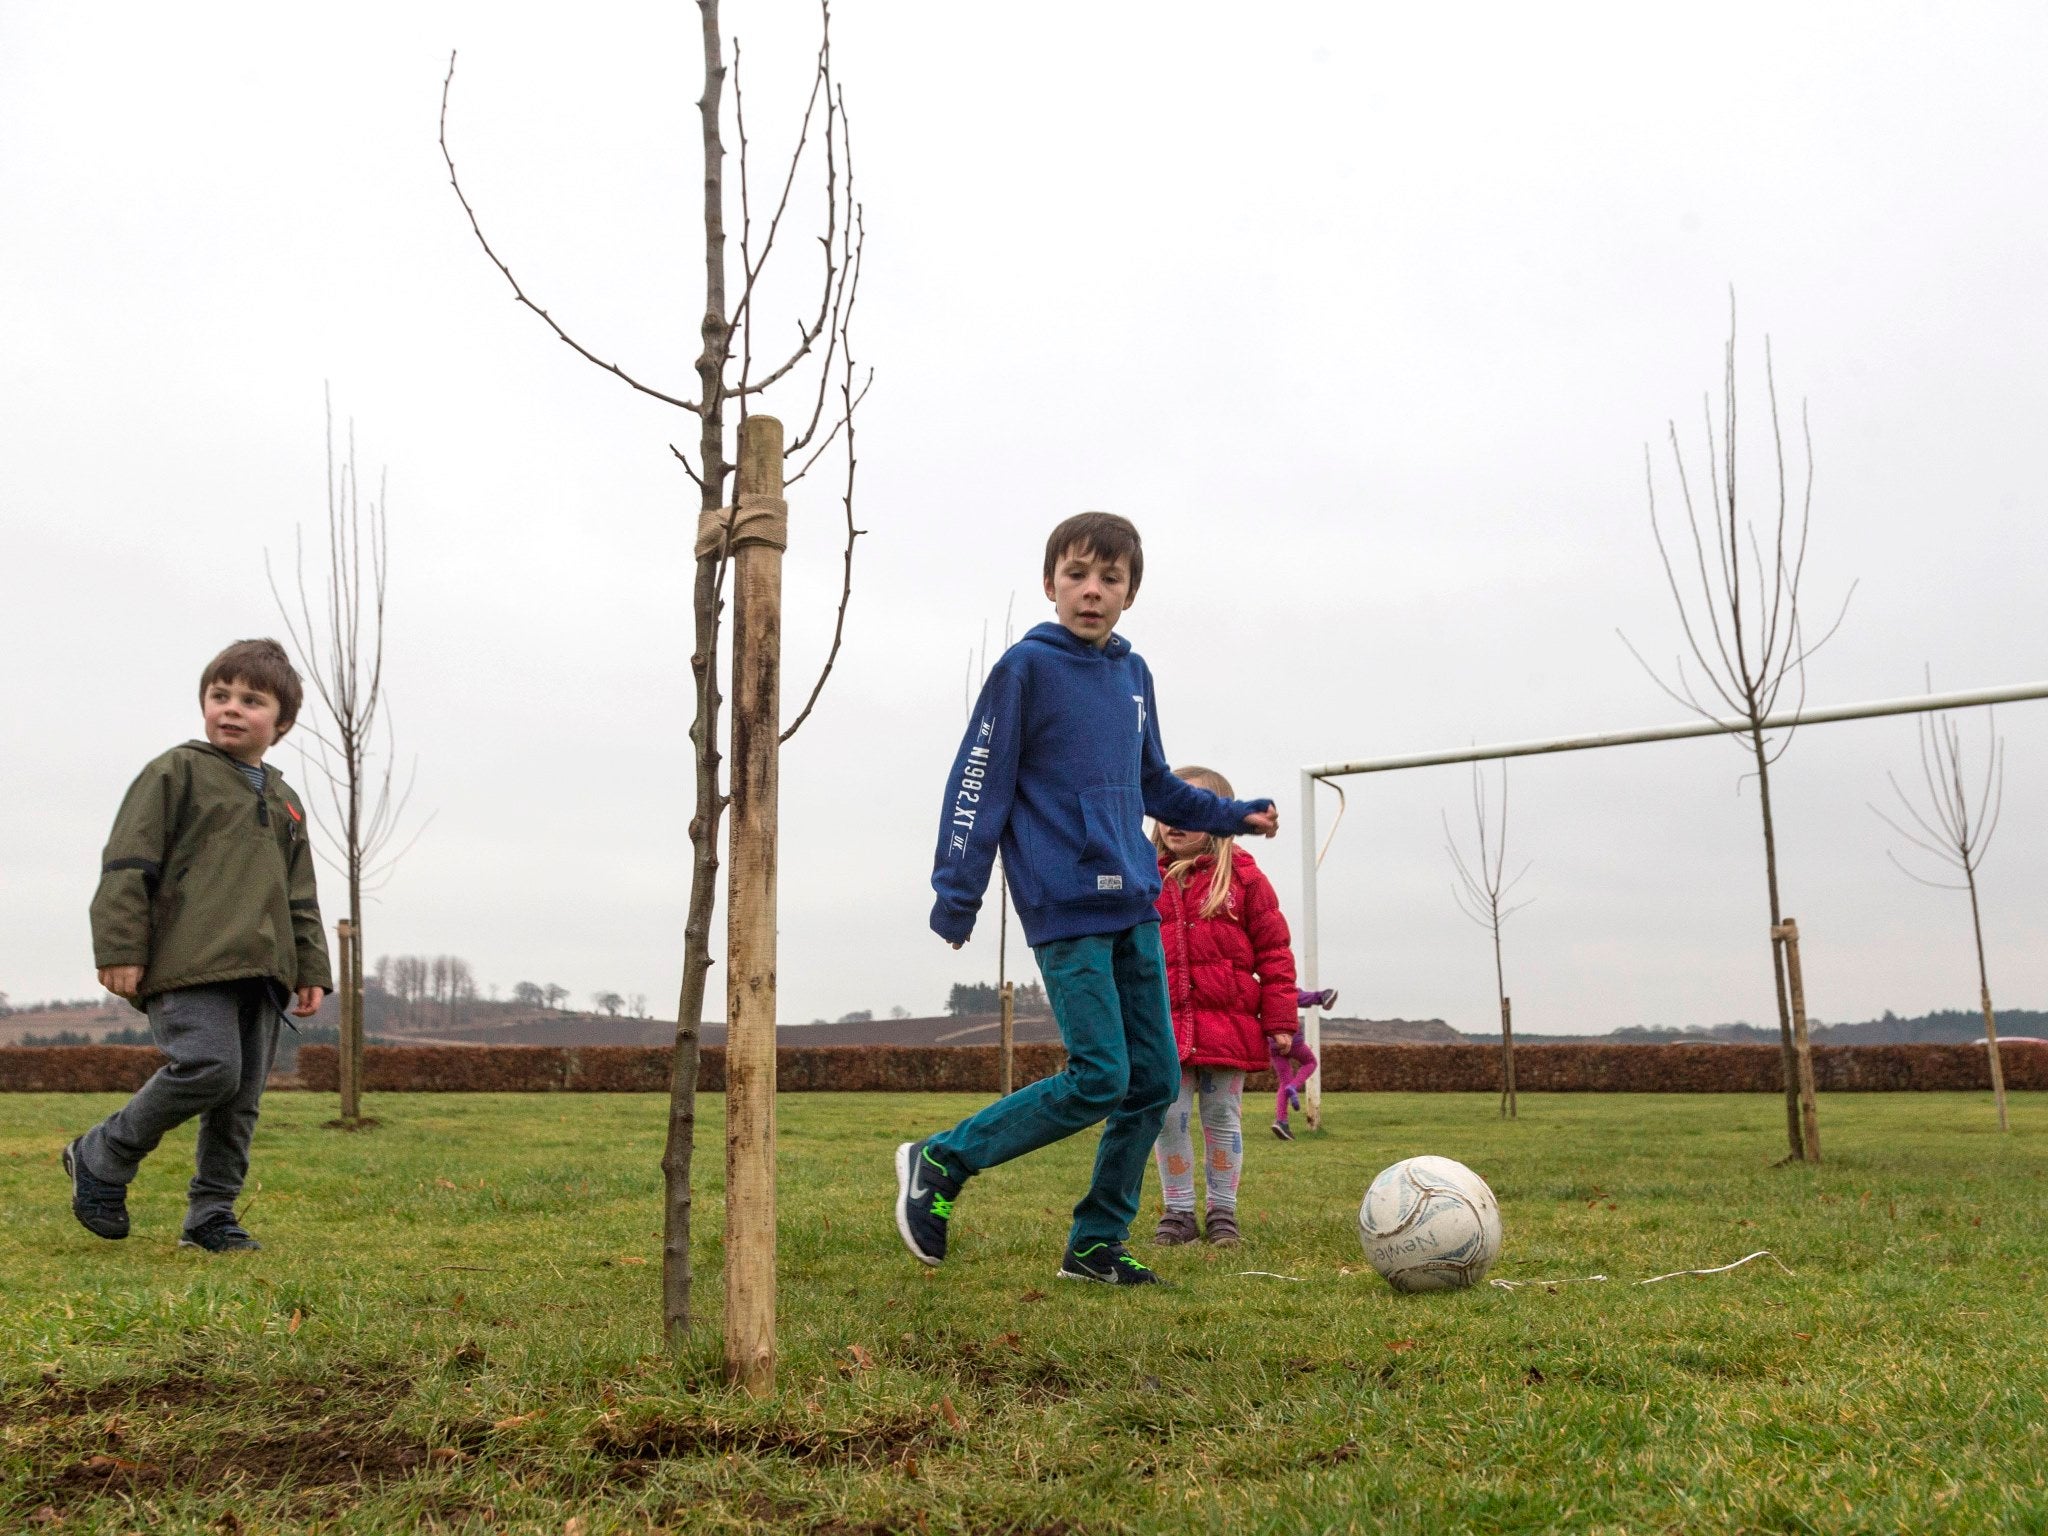 Children play football among trees in Logie Durno